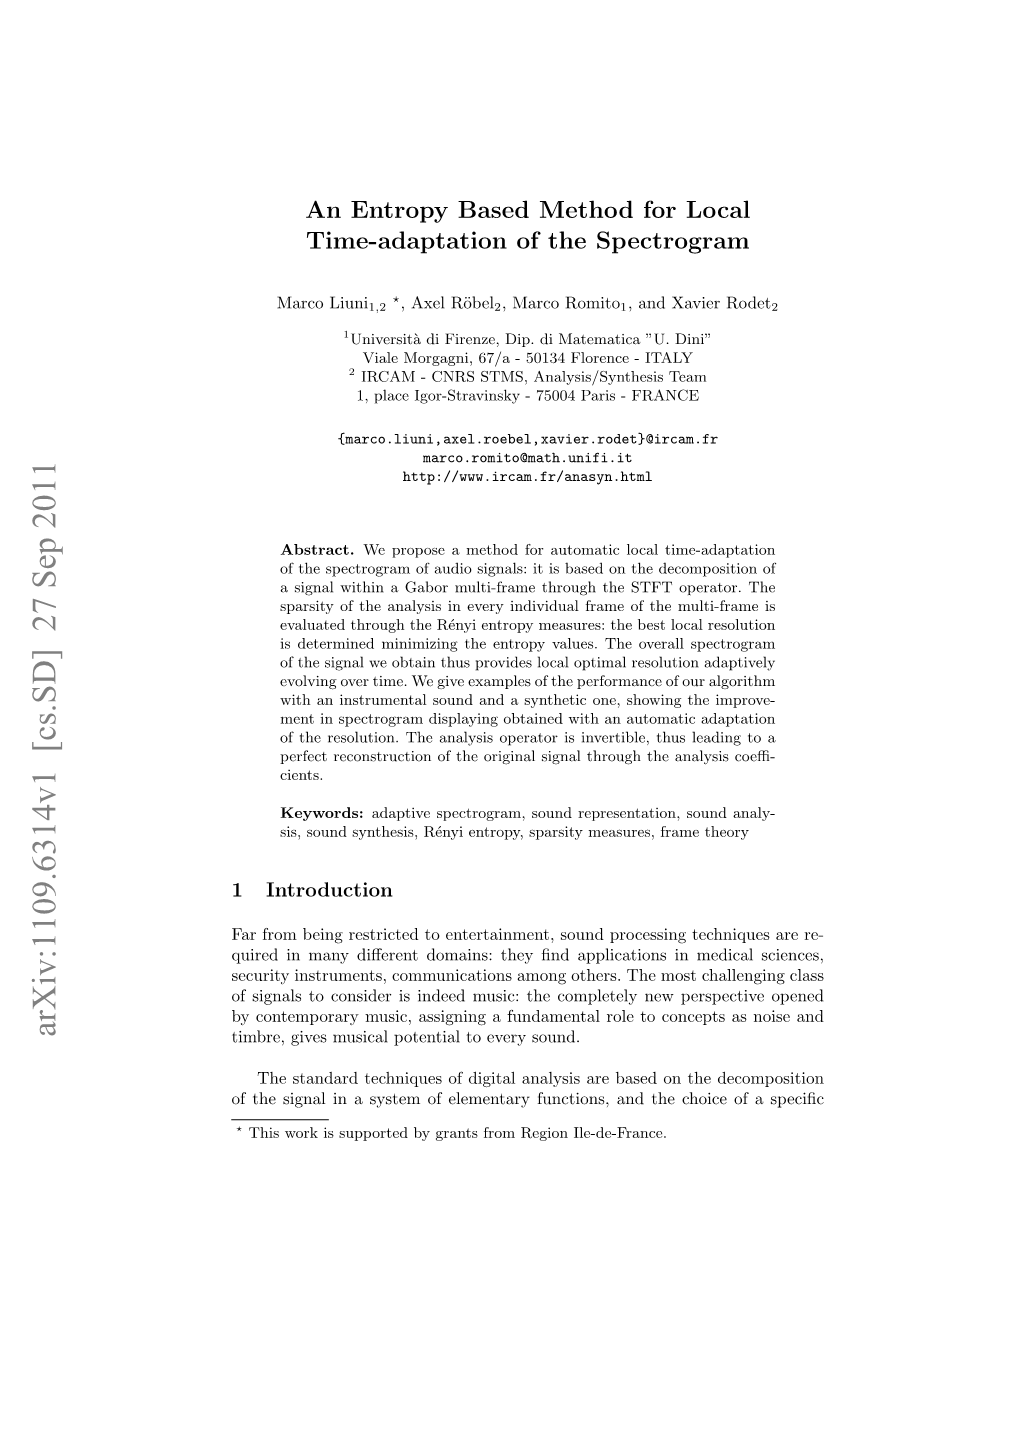 An Entropy Based Method for Local Time-Adaptation of the Spectrogram